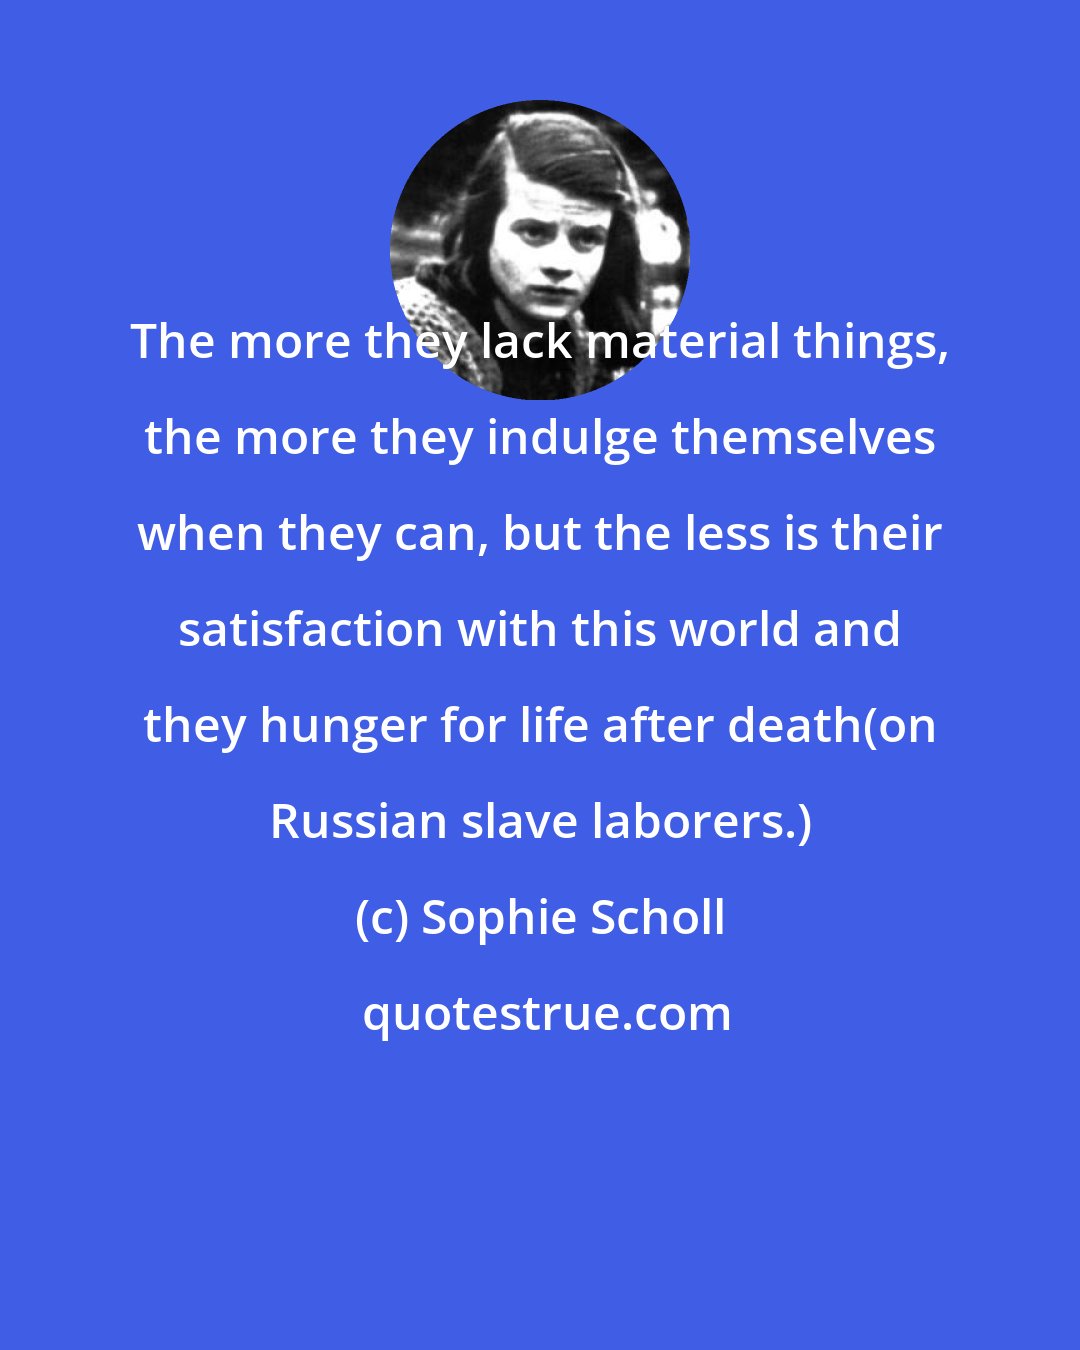 Sophie Scholl: The more they lack material things, the more they indulge themselves when they can, but the less is their satisfaction with this world and they hunger for life after death(on Russian slave laborers.)